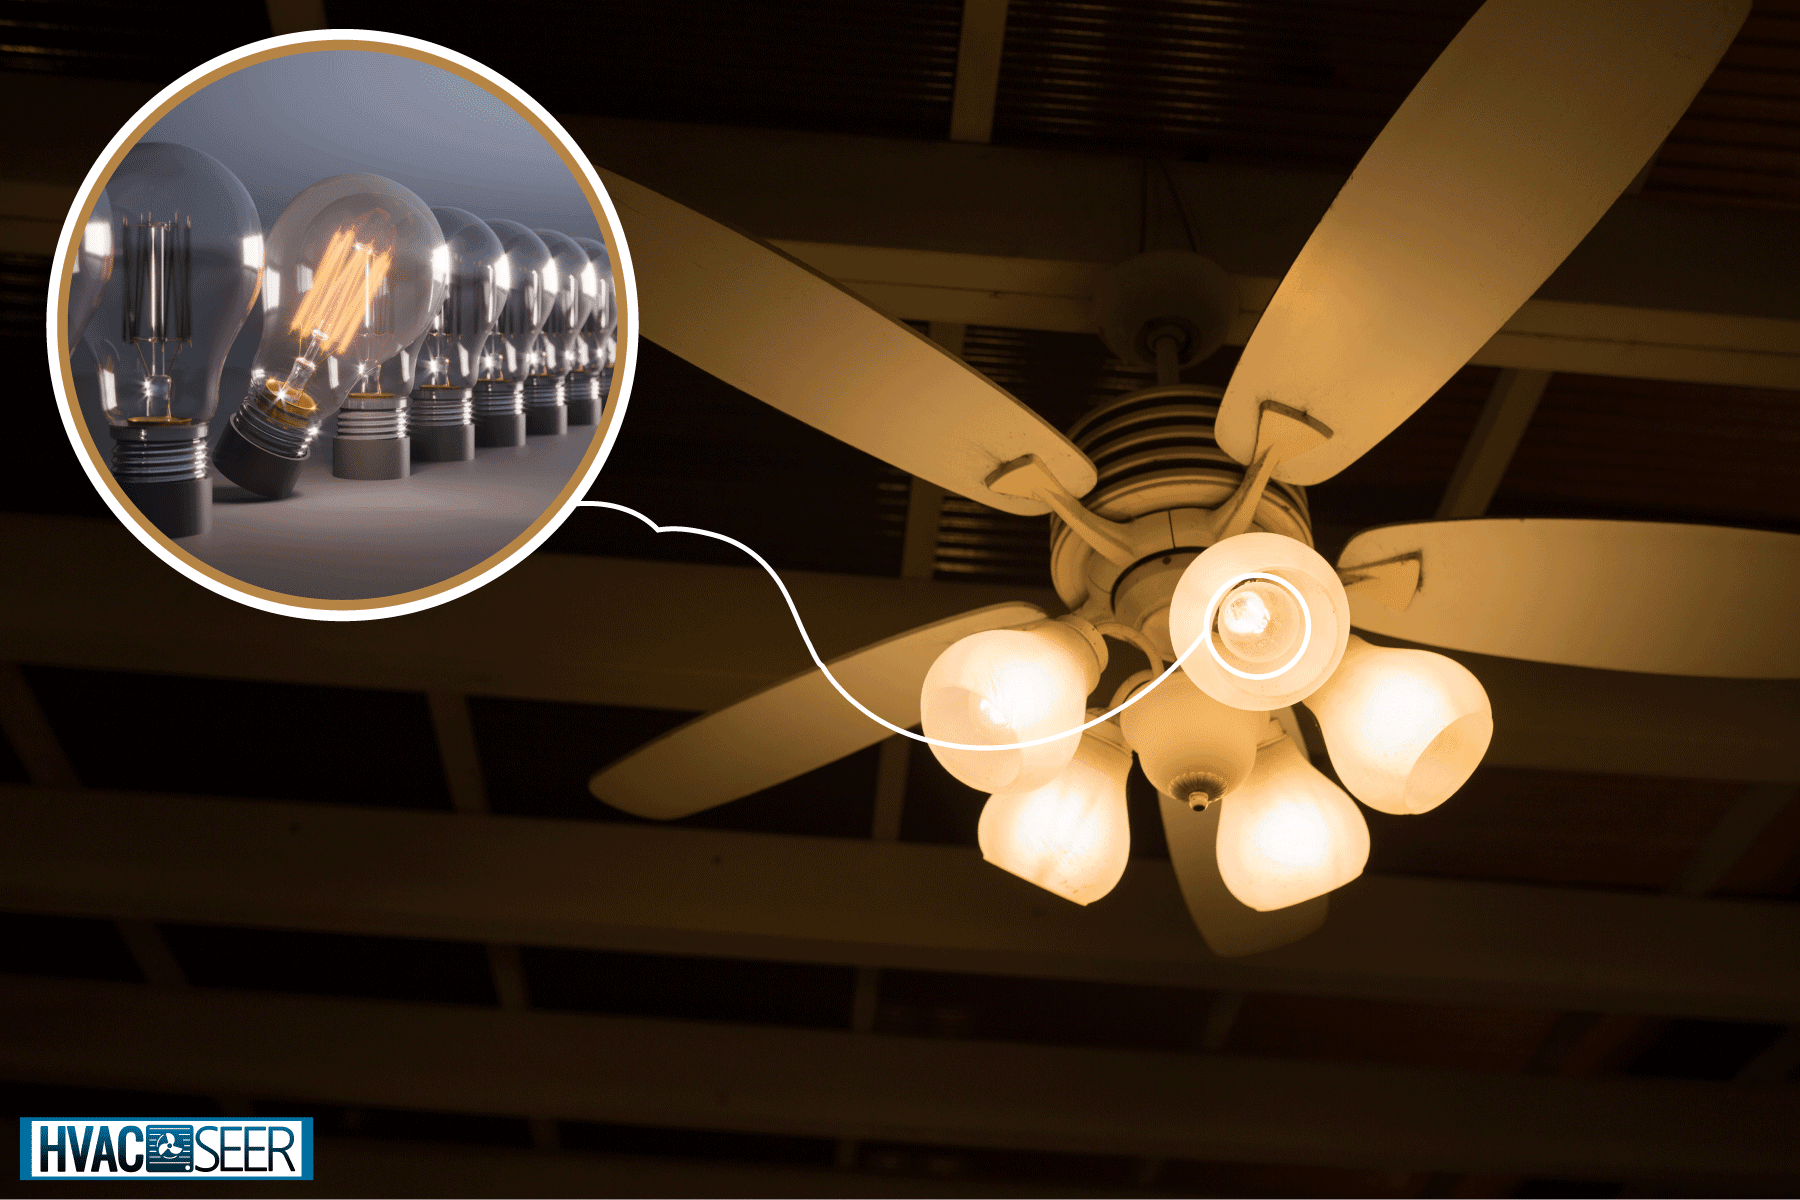 A wooden blade ceiling fan with lights turned on, How To Fix a Ceiling Fan Light